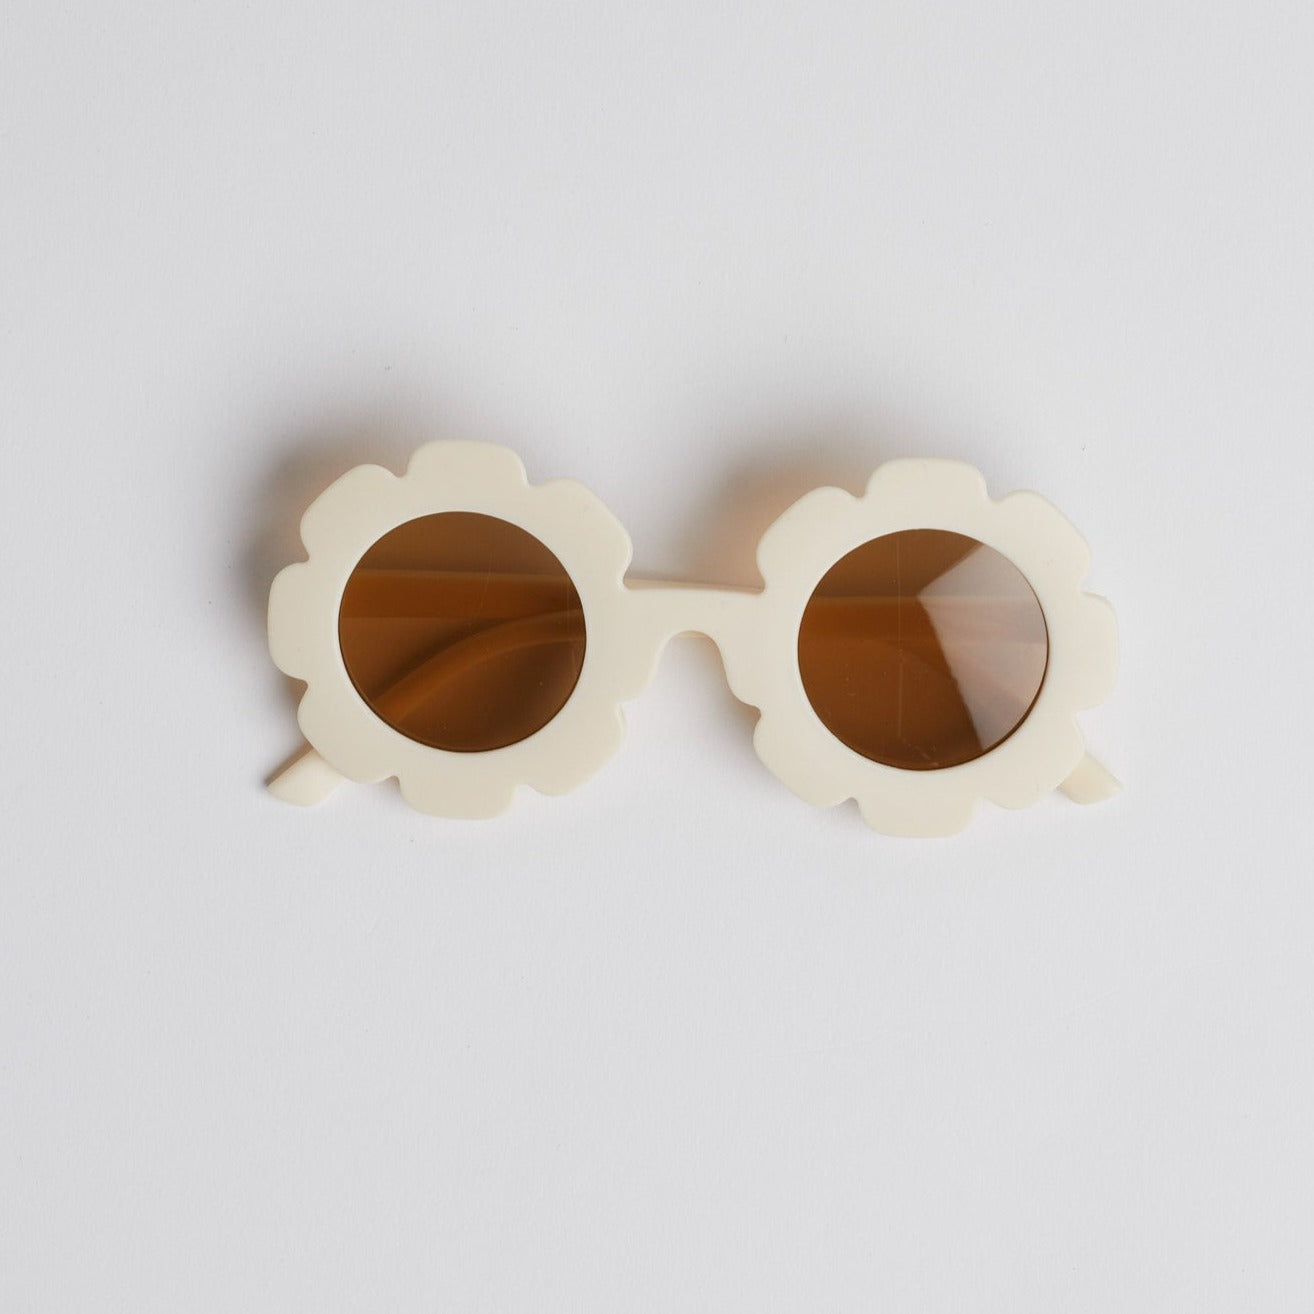 Beige floral baby sunglasses on white